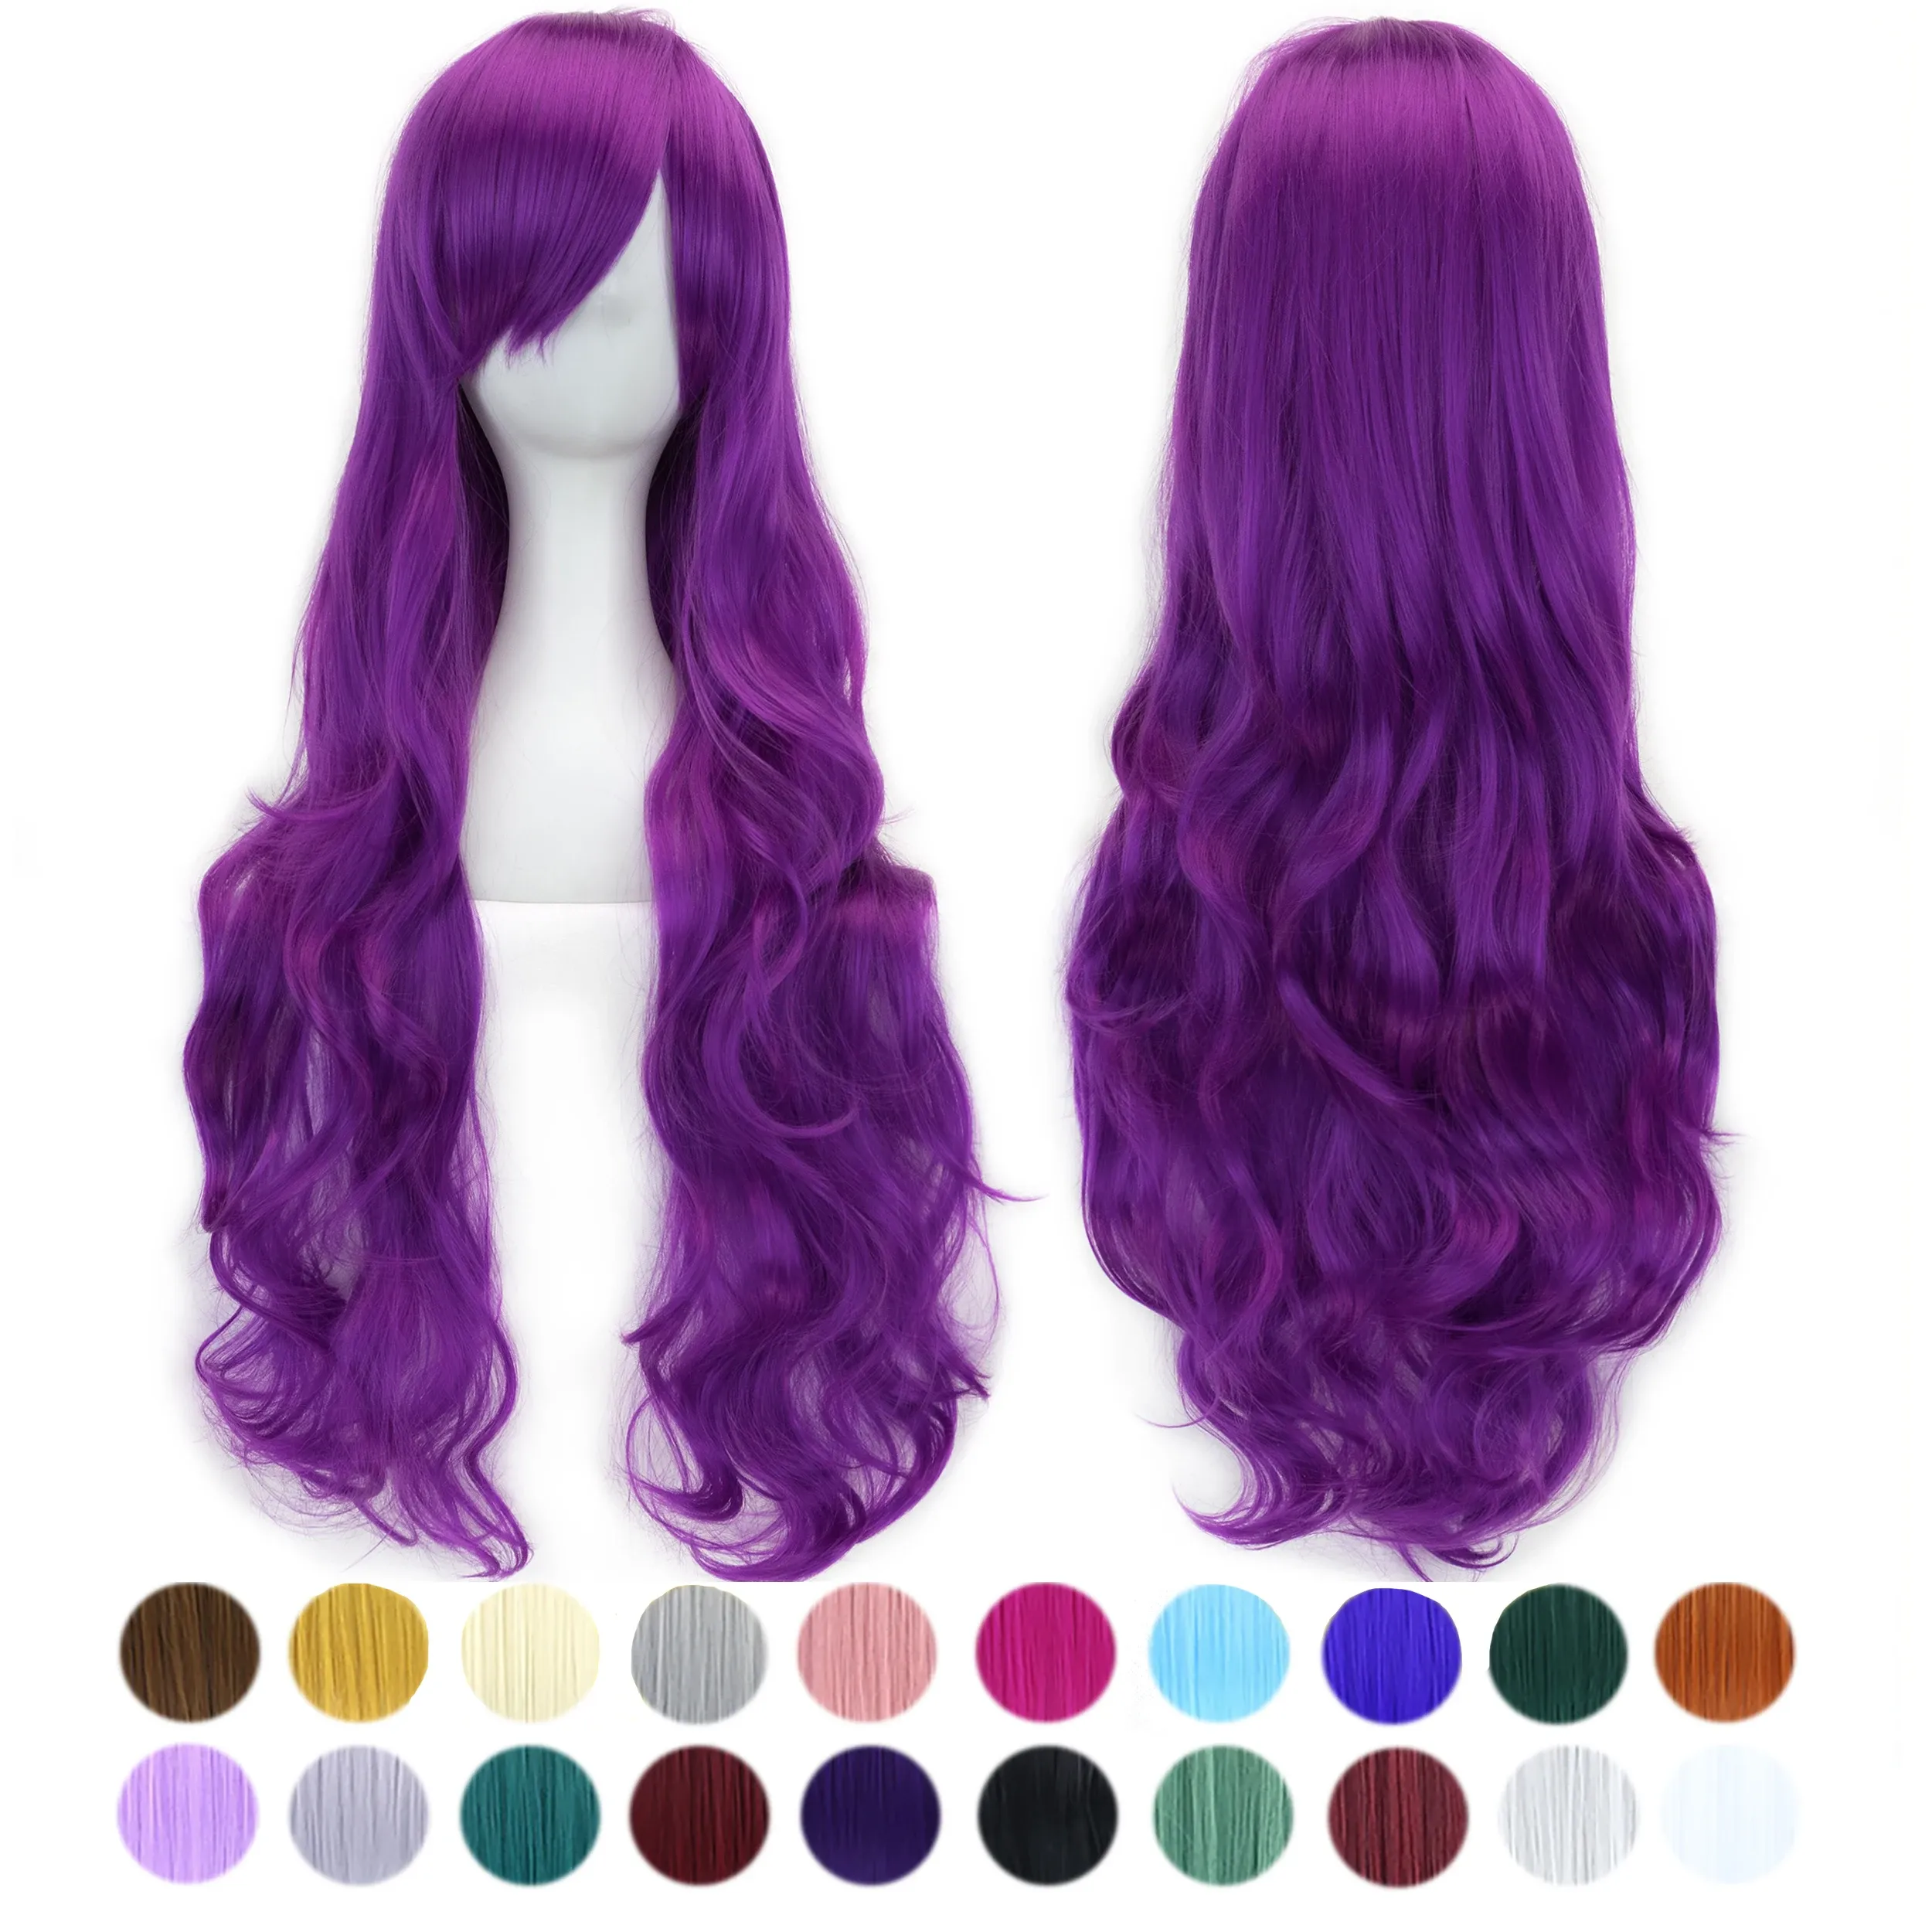 Wigs Soowee 30 Colors Long Curly Hair Orange Purple Cosplay Wigs Heat Resistant Synthetic Hair Accessories Party Wig for Women